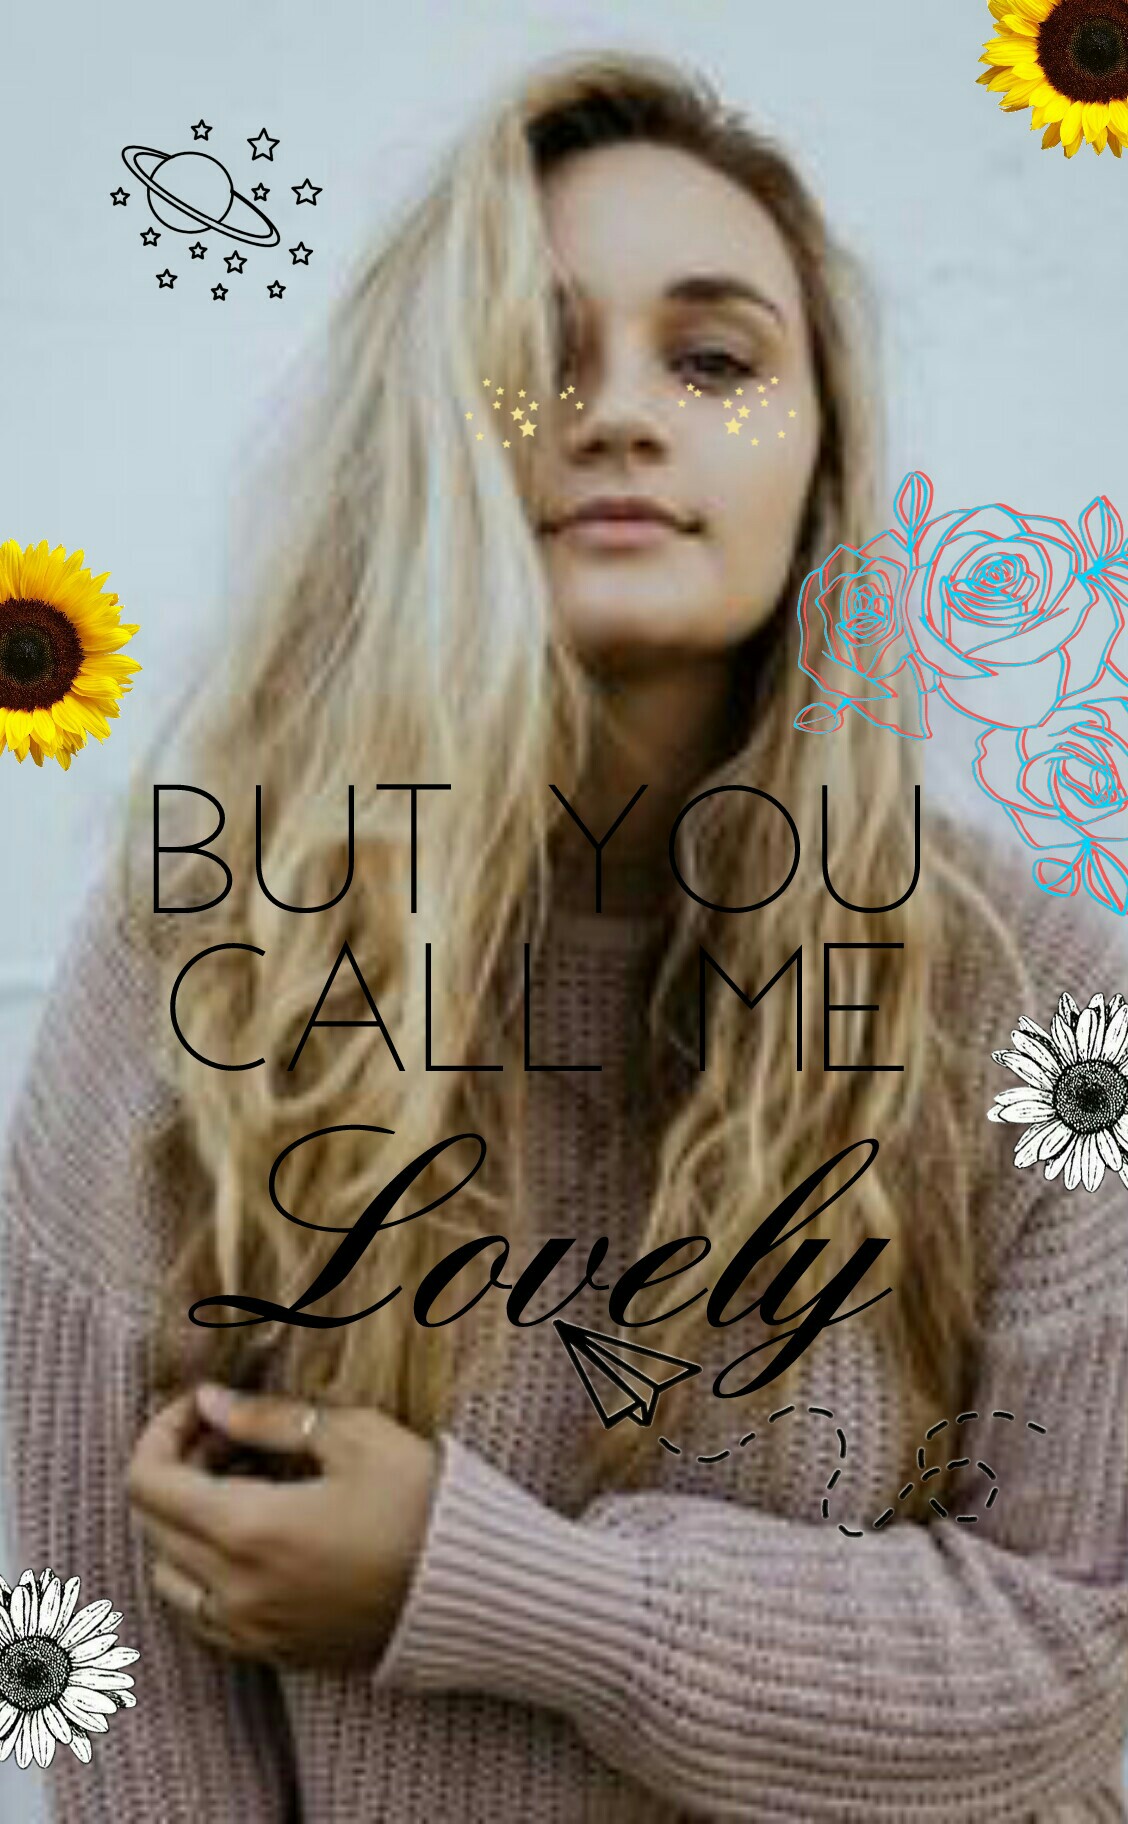 Tap!!
"Lovely" by Hollyn, love that song!!!